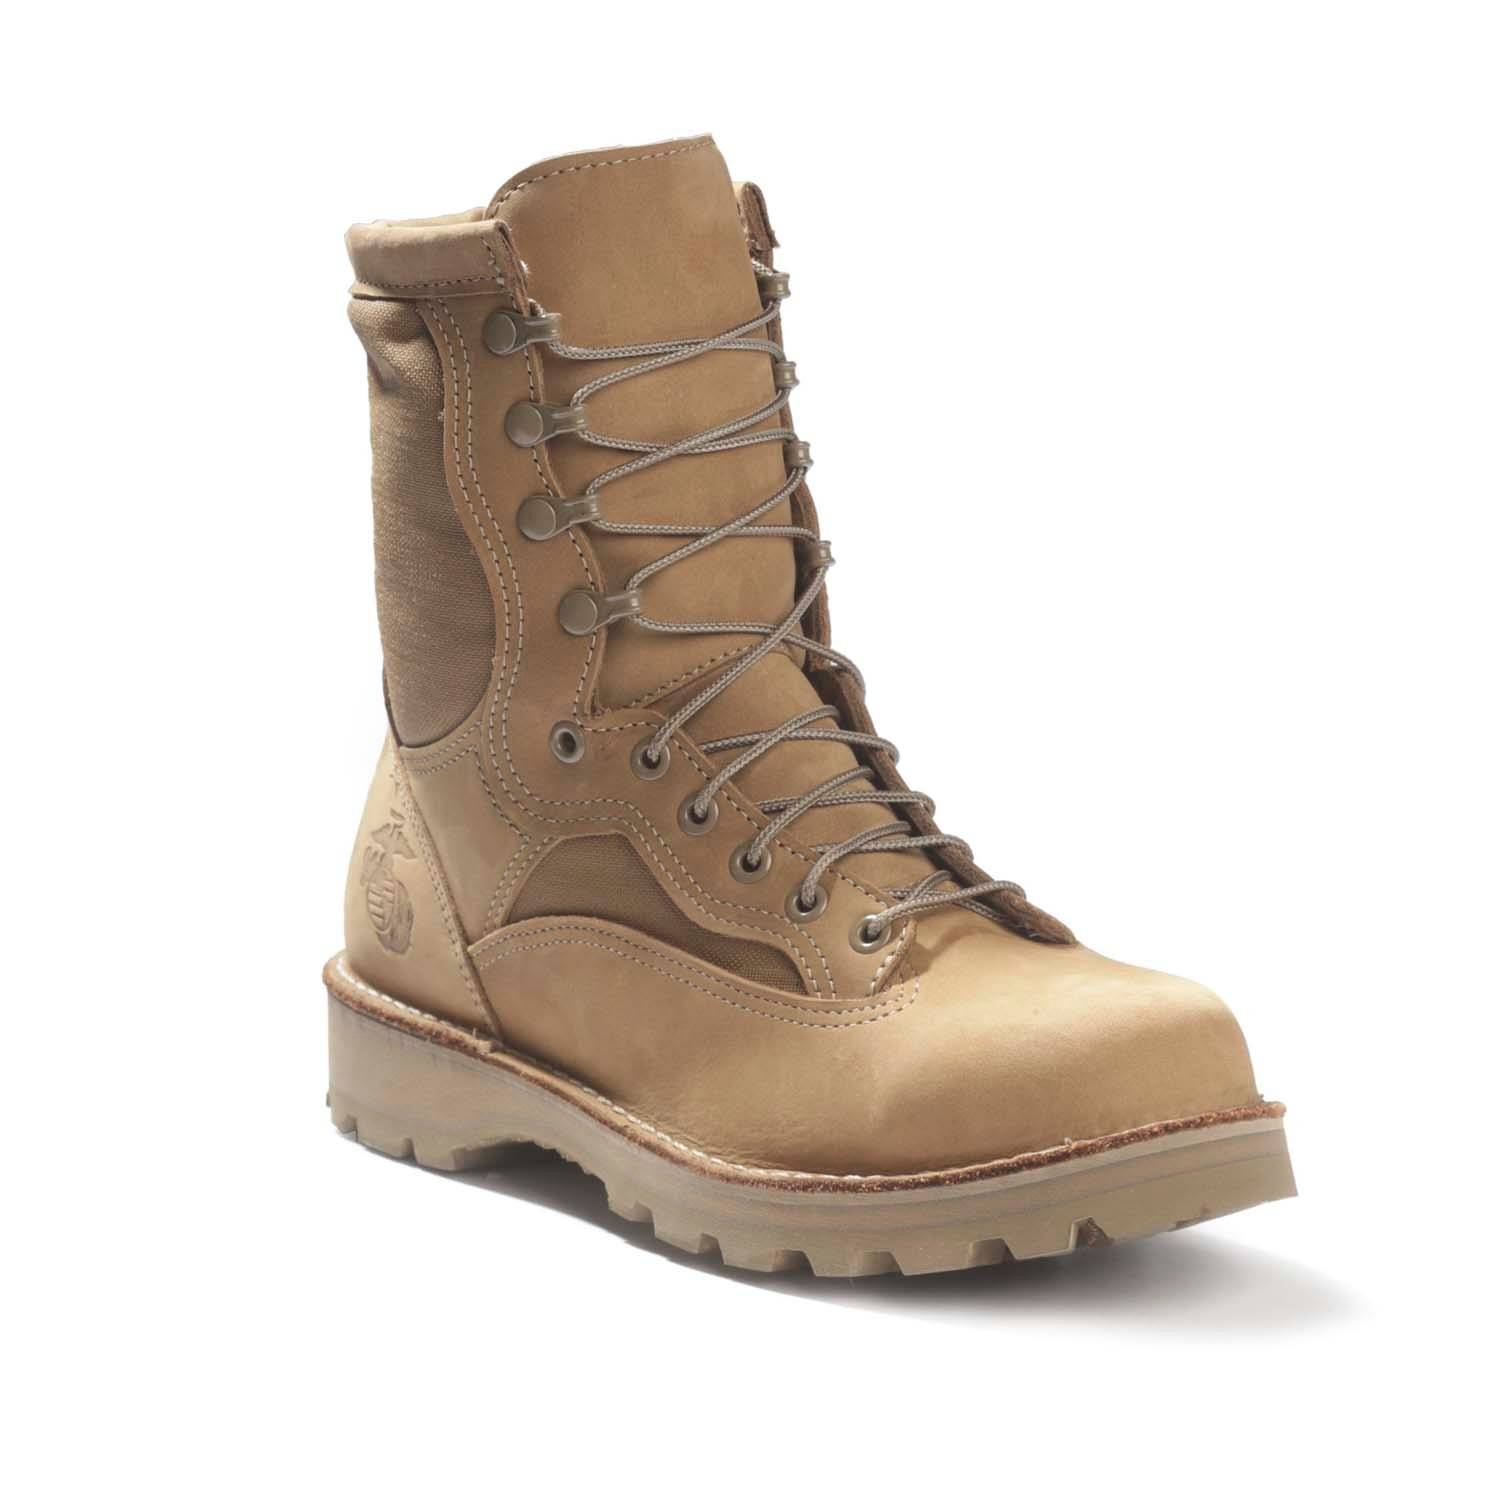 Danner Marine Expeditionary Boot 8" Hot Mojave Boot